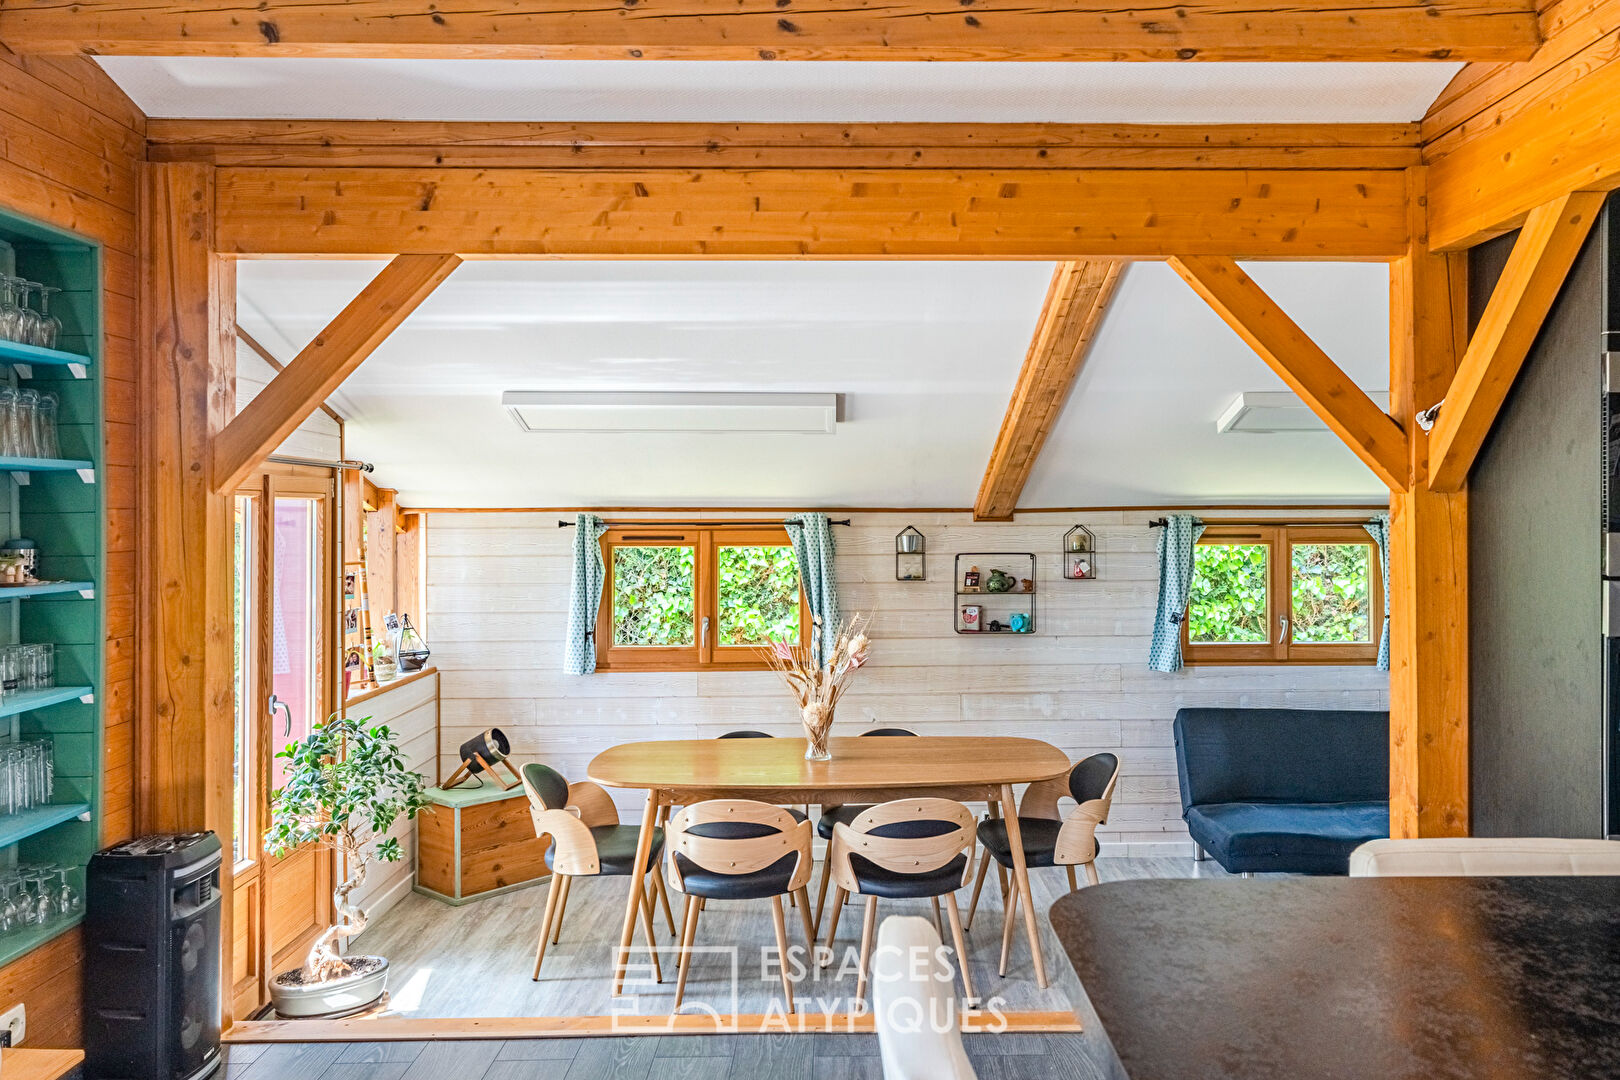 Bucolic, authentic and cozy chalet in the Pays d’Auge